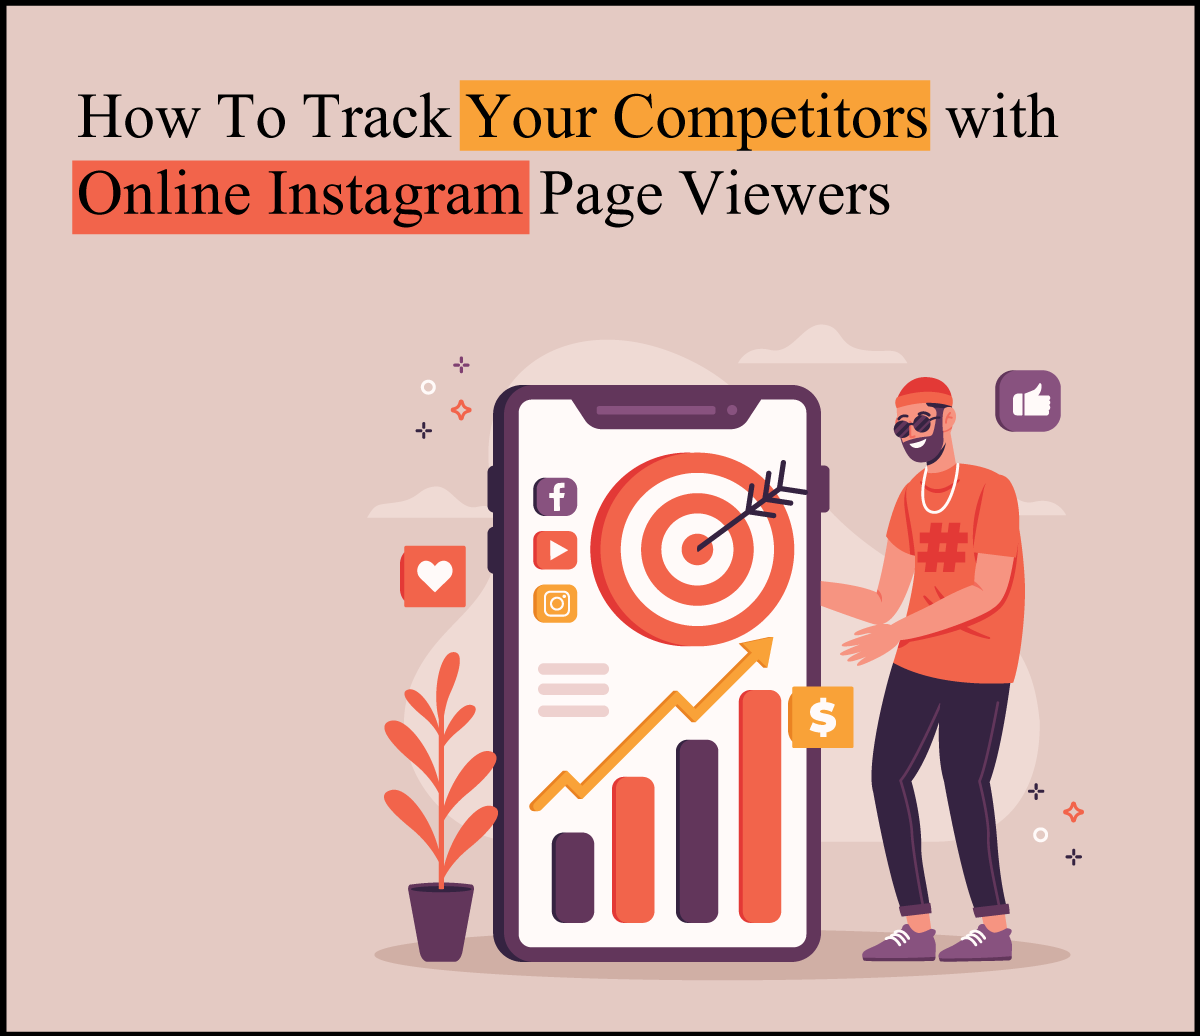 How To Track Your Competitors with Online Instagram Page Viewers